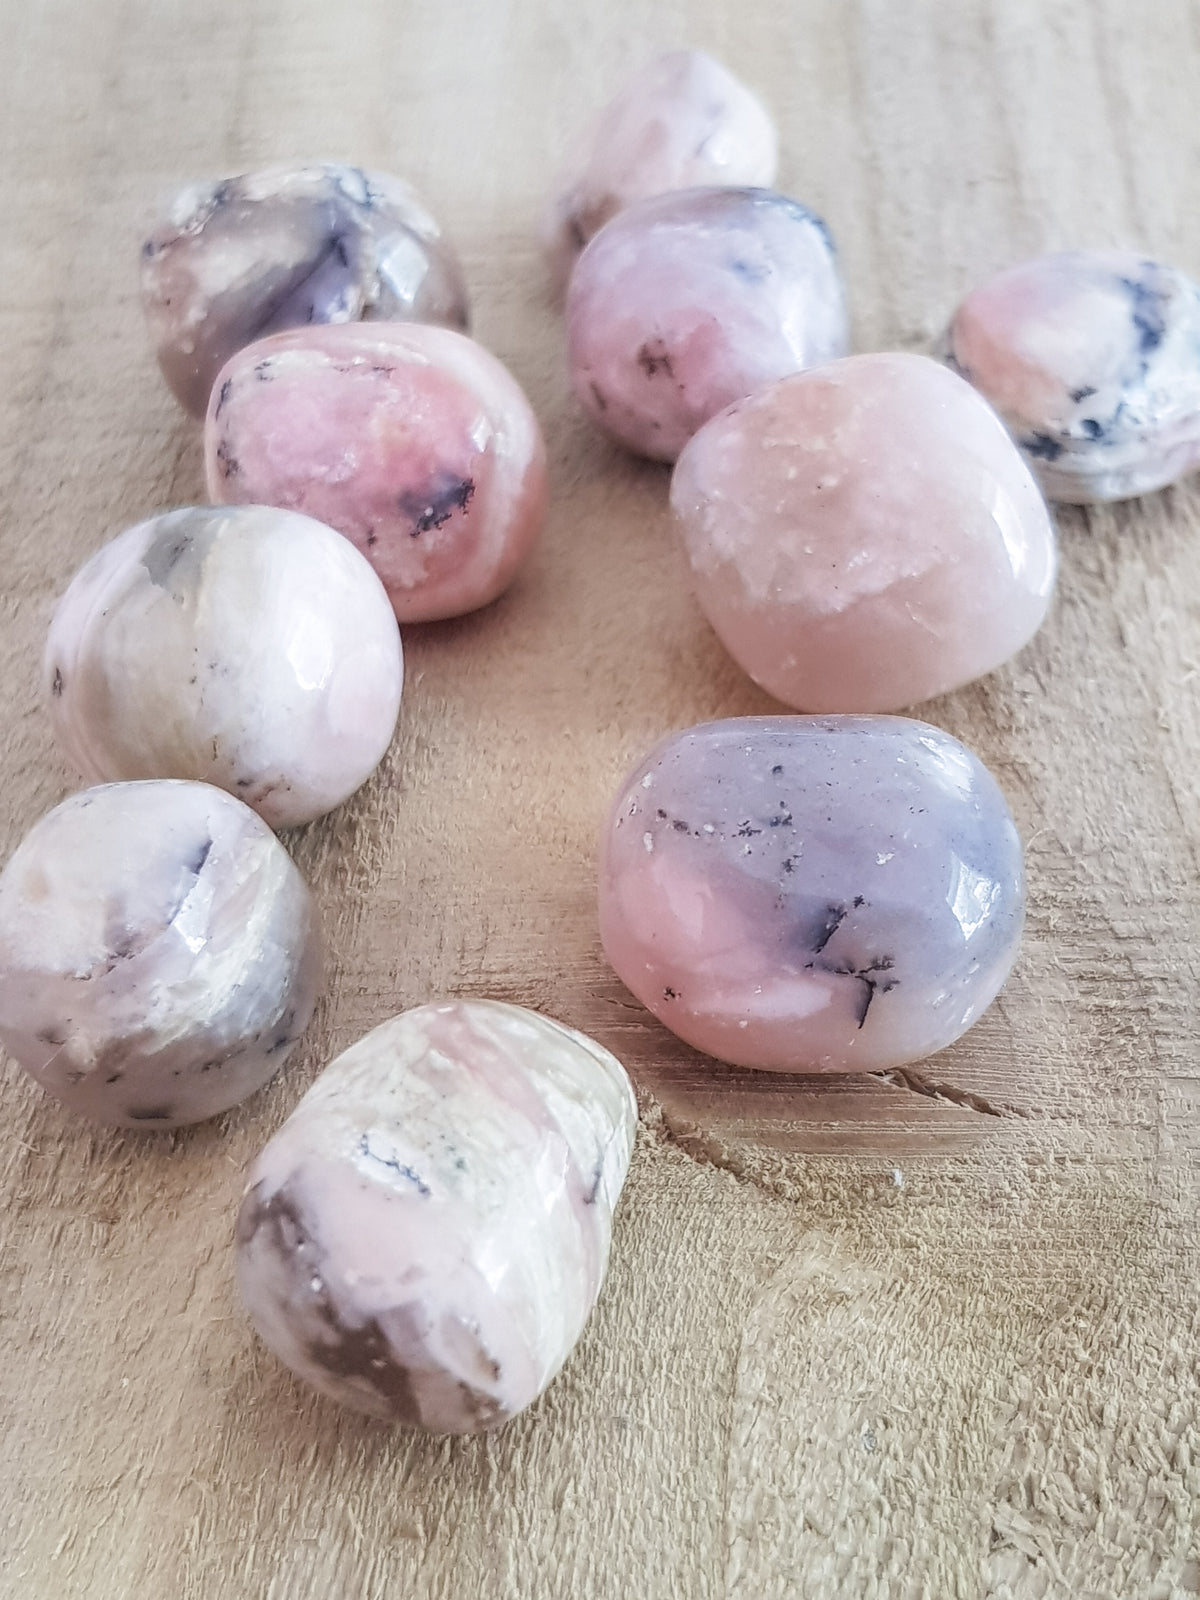 pink opal tumblestones. somne variation of colour from dark pibnk to pastel, some banding and inclusions